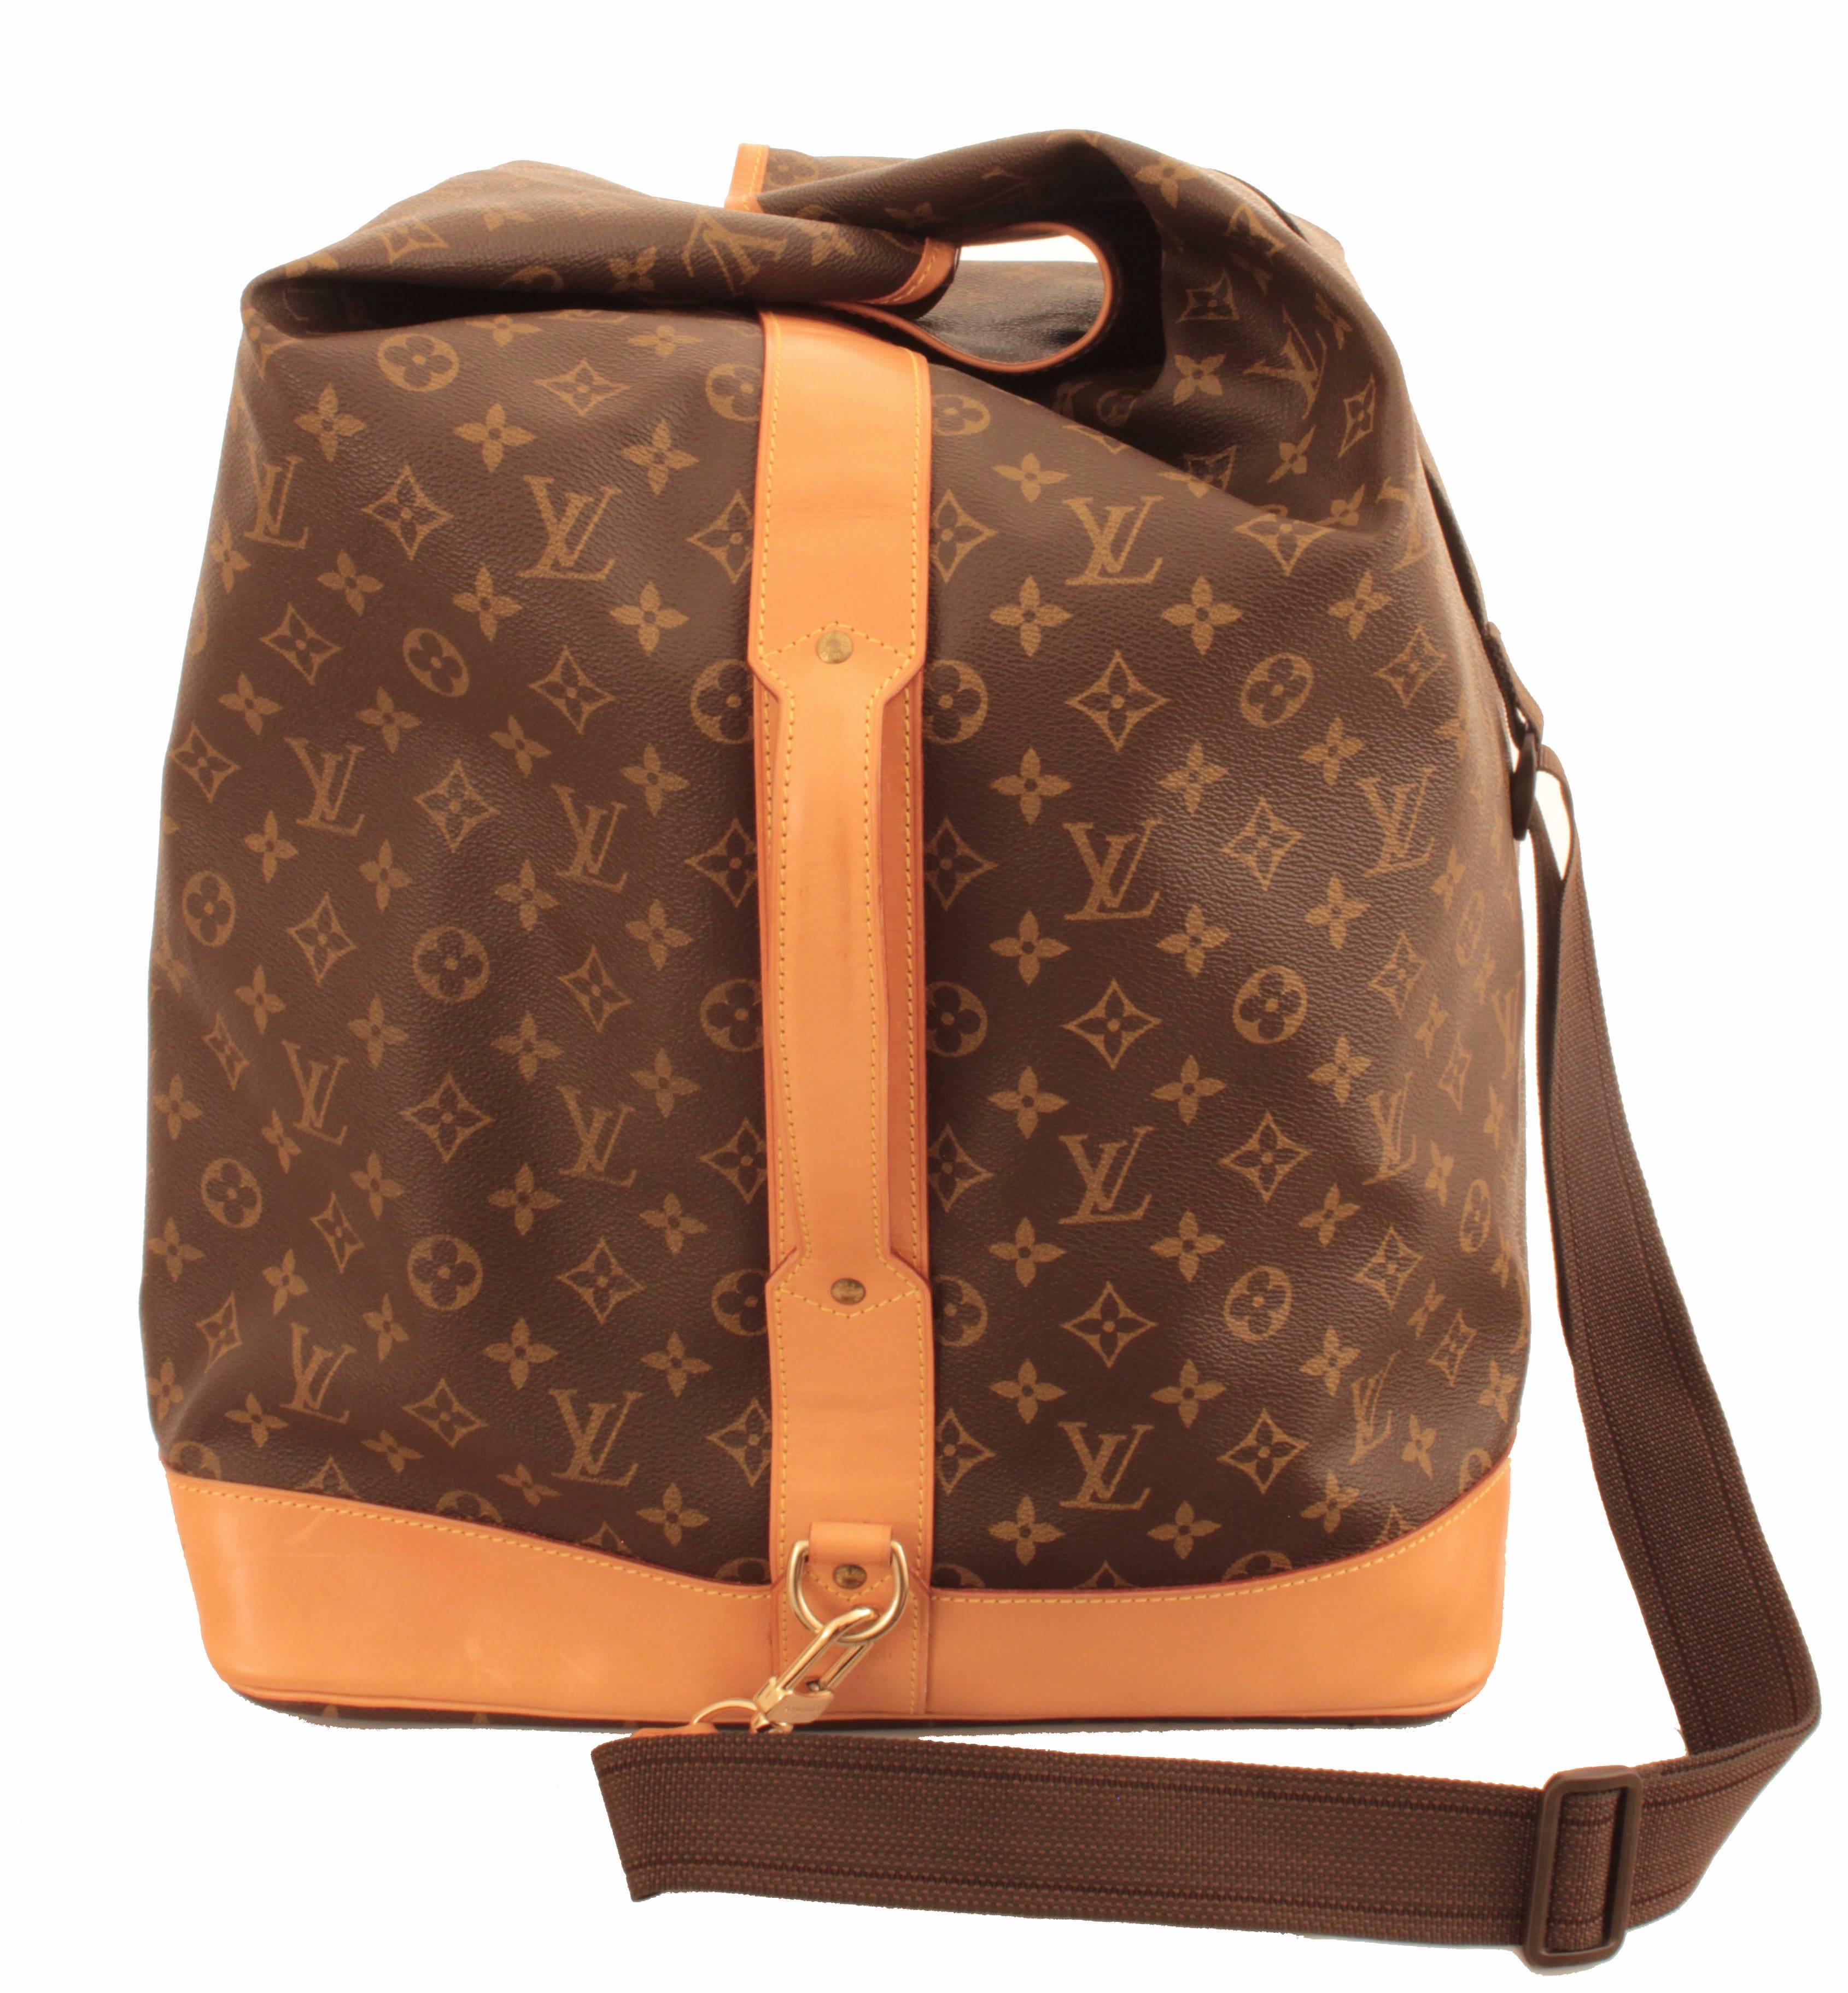 Travel in style with this incredible Louis Vuitton monogram Sac Marin PM, manufactured in 1996.  Note that this is the more popular PM version, which can easily be used as carry-on luggage when flying, and currently retails in as a Damier special